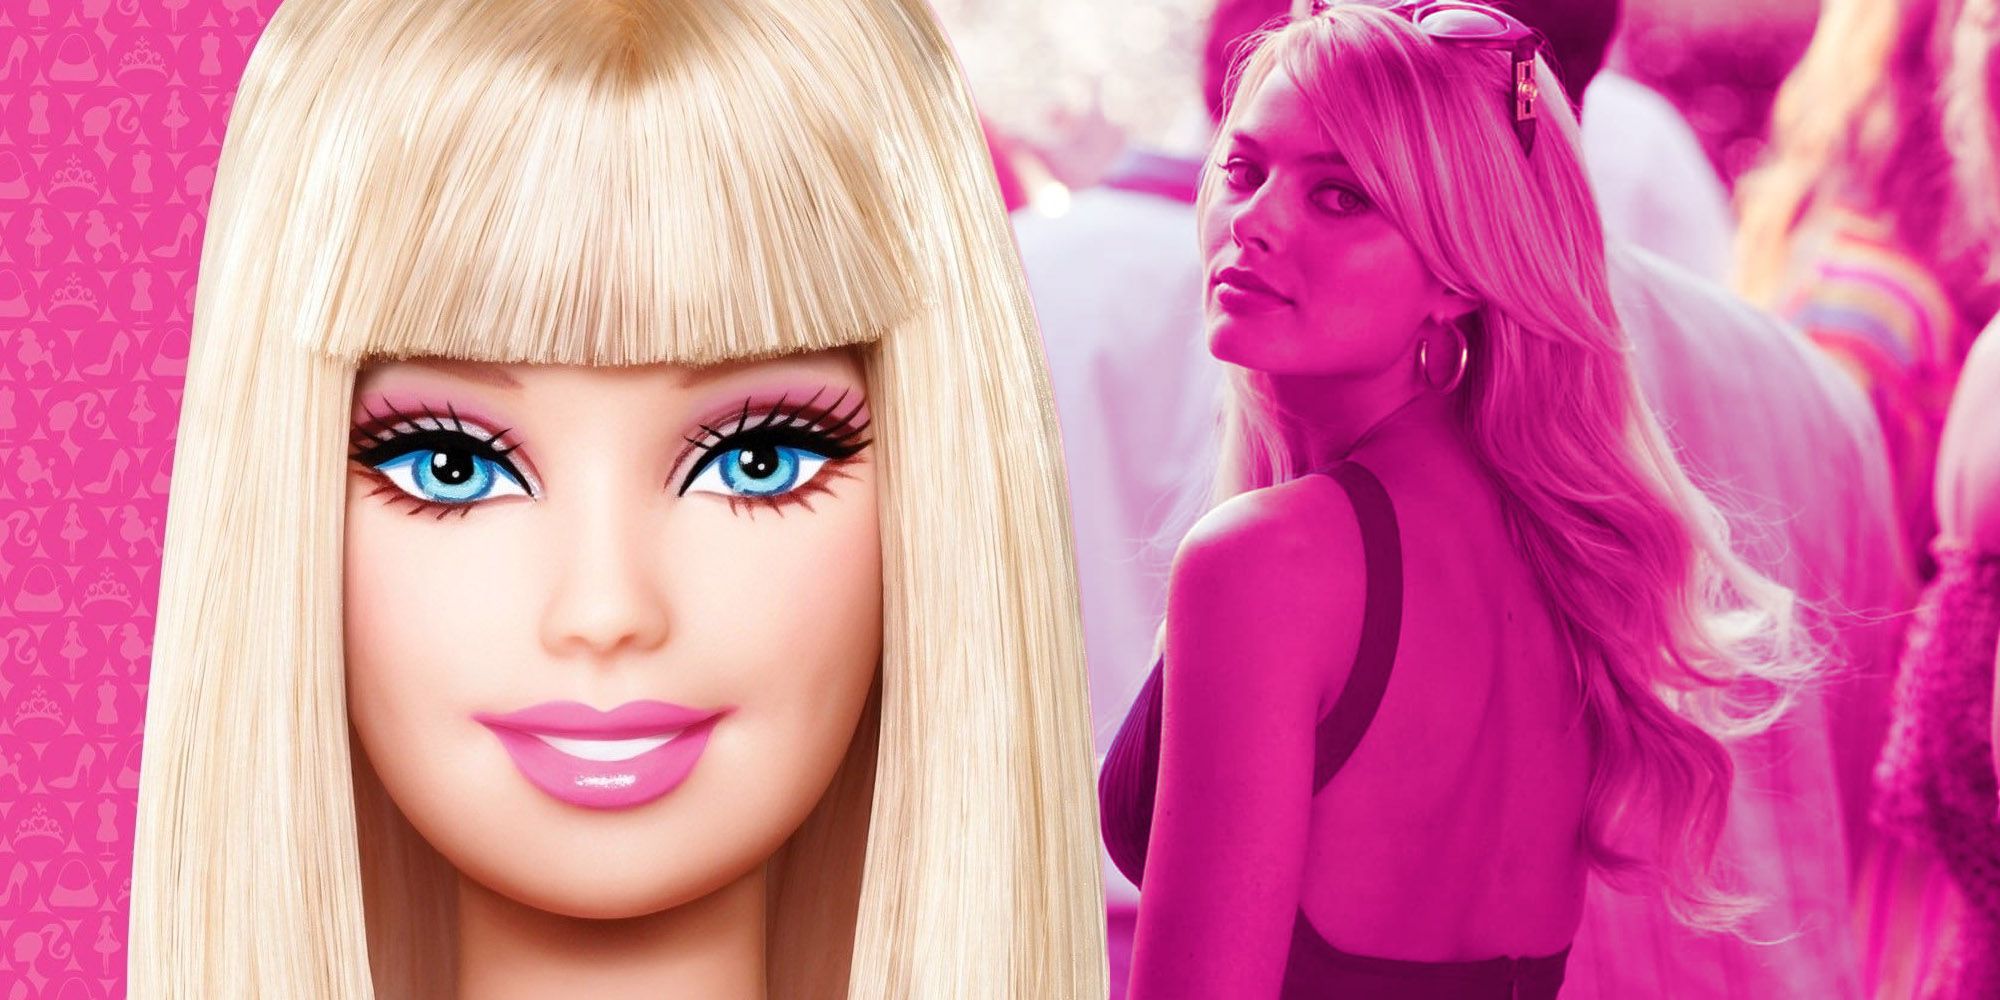 Collage of Barbie doll and Margot Robbie 